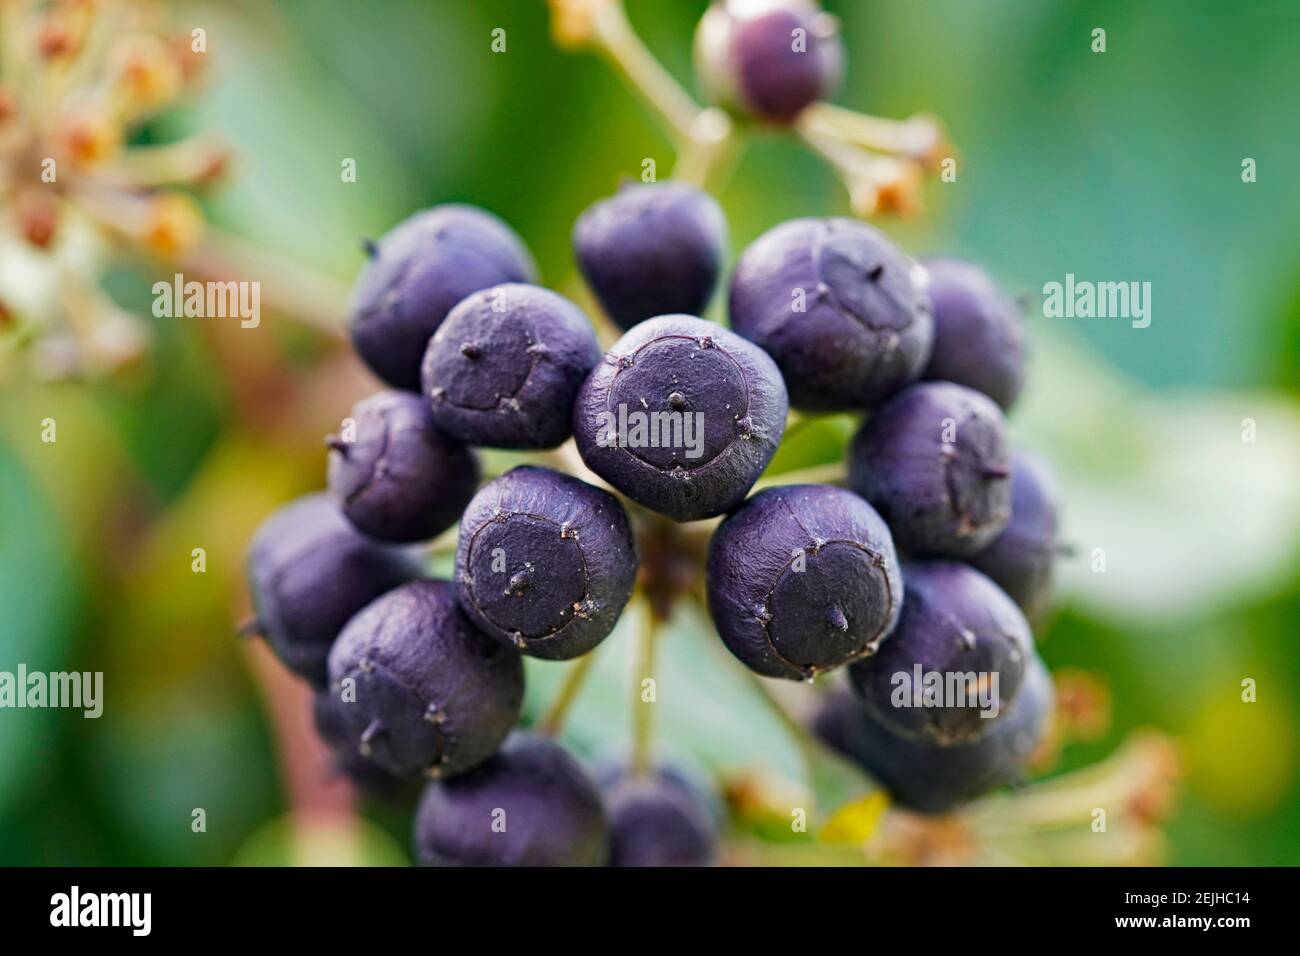 Poisonous ivy berries. Fruits of an ivy plant. Common ivy, Hedera helix. Close up. Stock Photo